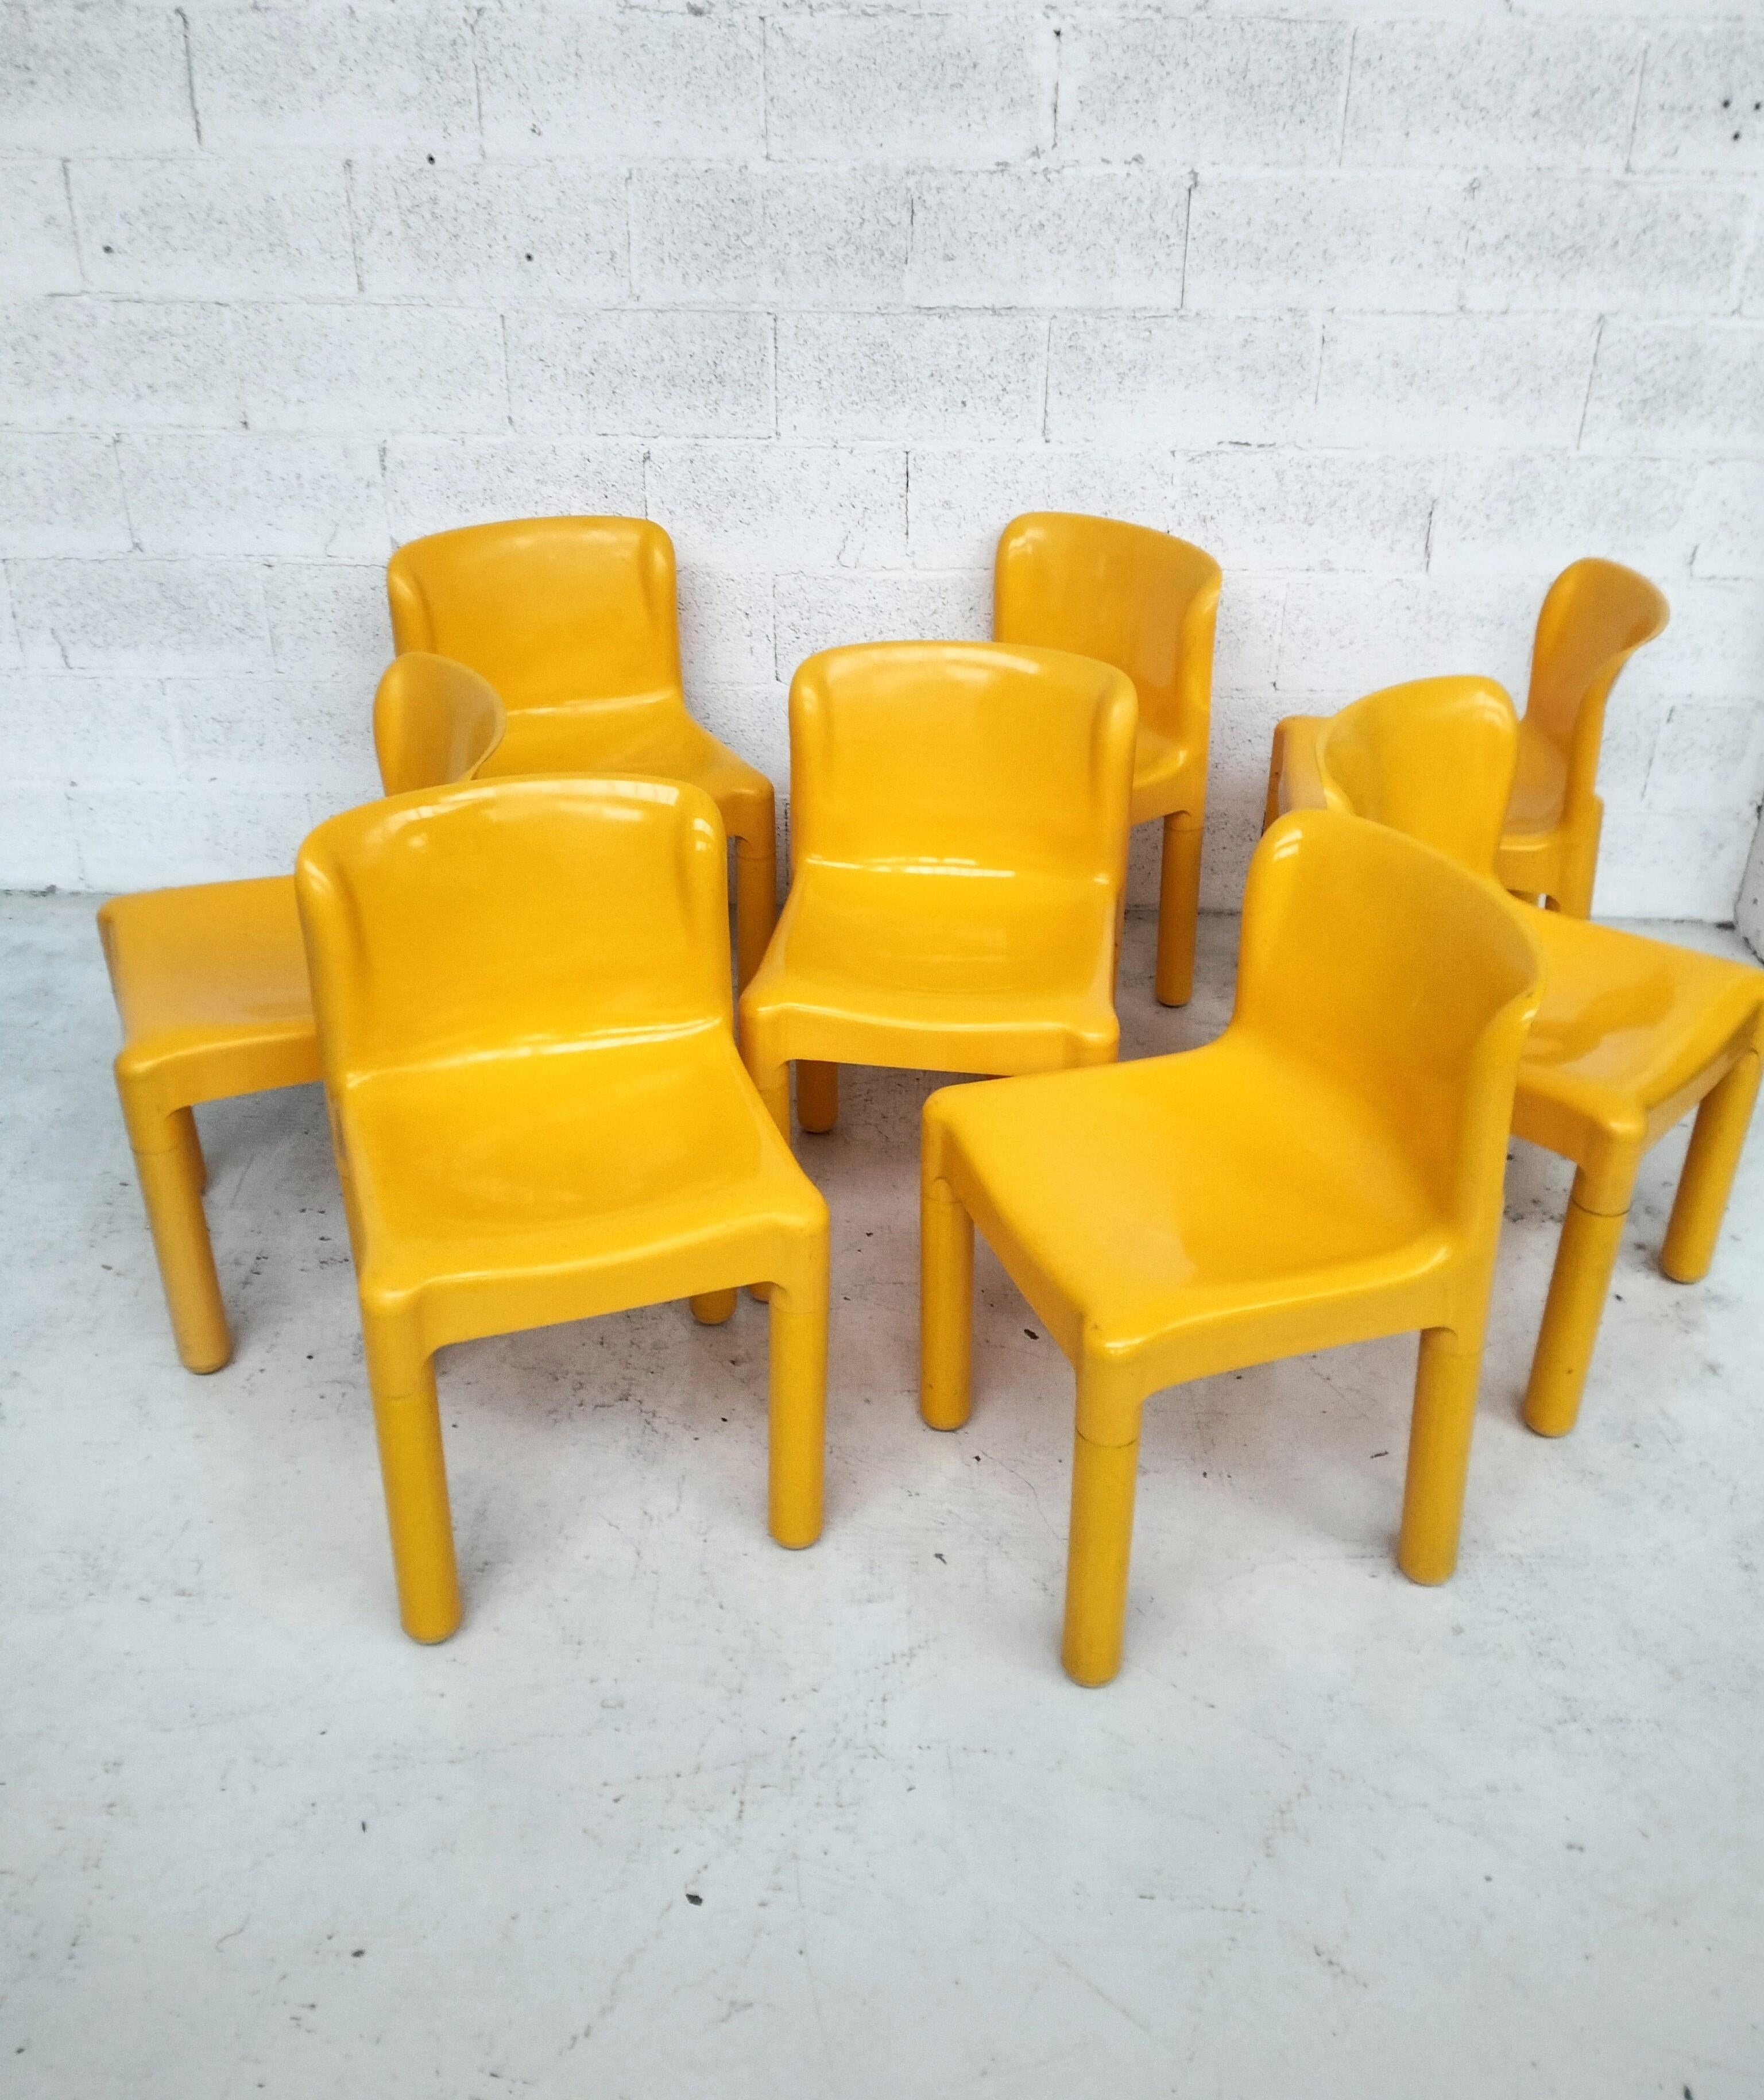 Oustanding and rare set of 8 yellow plastic chairs 4875 model, designed by Carlo Bartoli and produced by Kartell 1970s. 

In Good condition, wear consistent with age and use.

